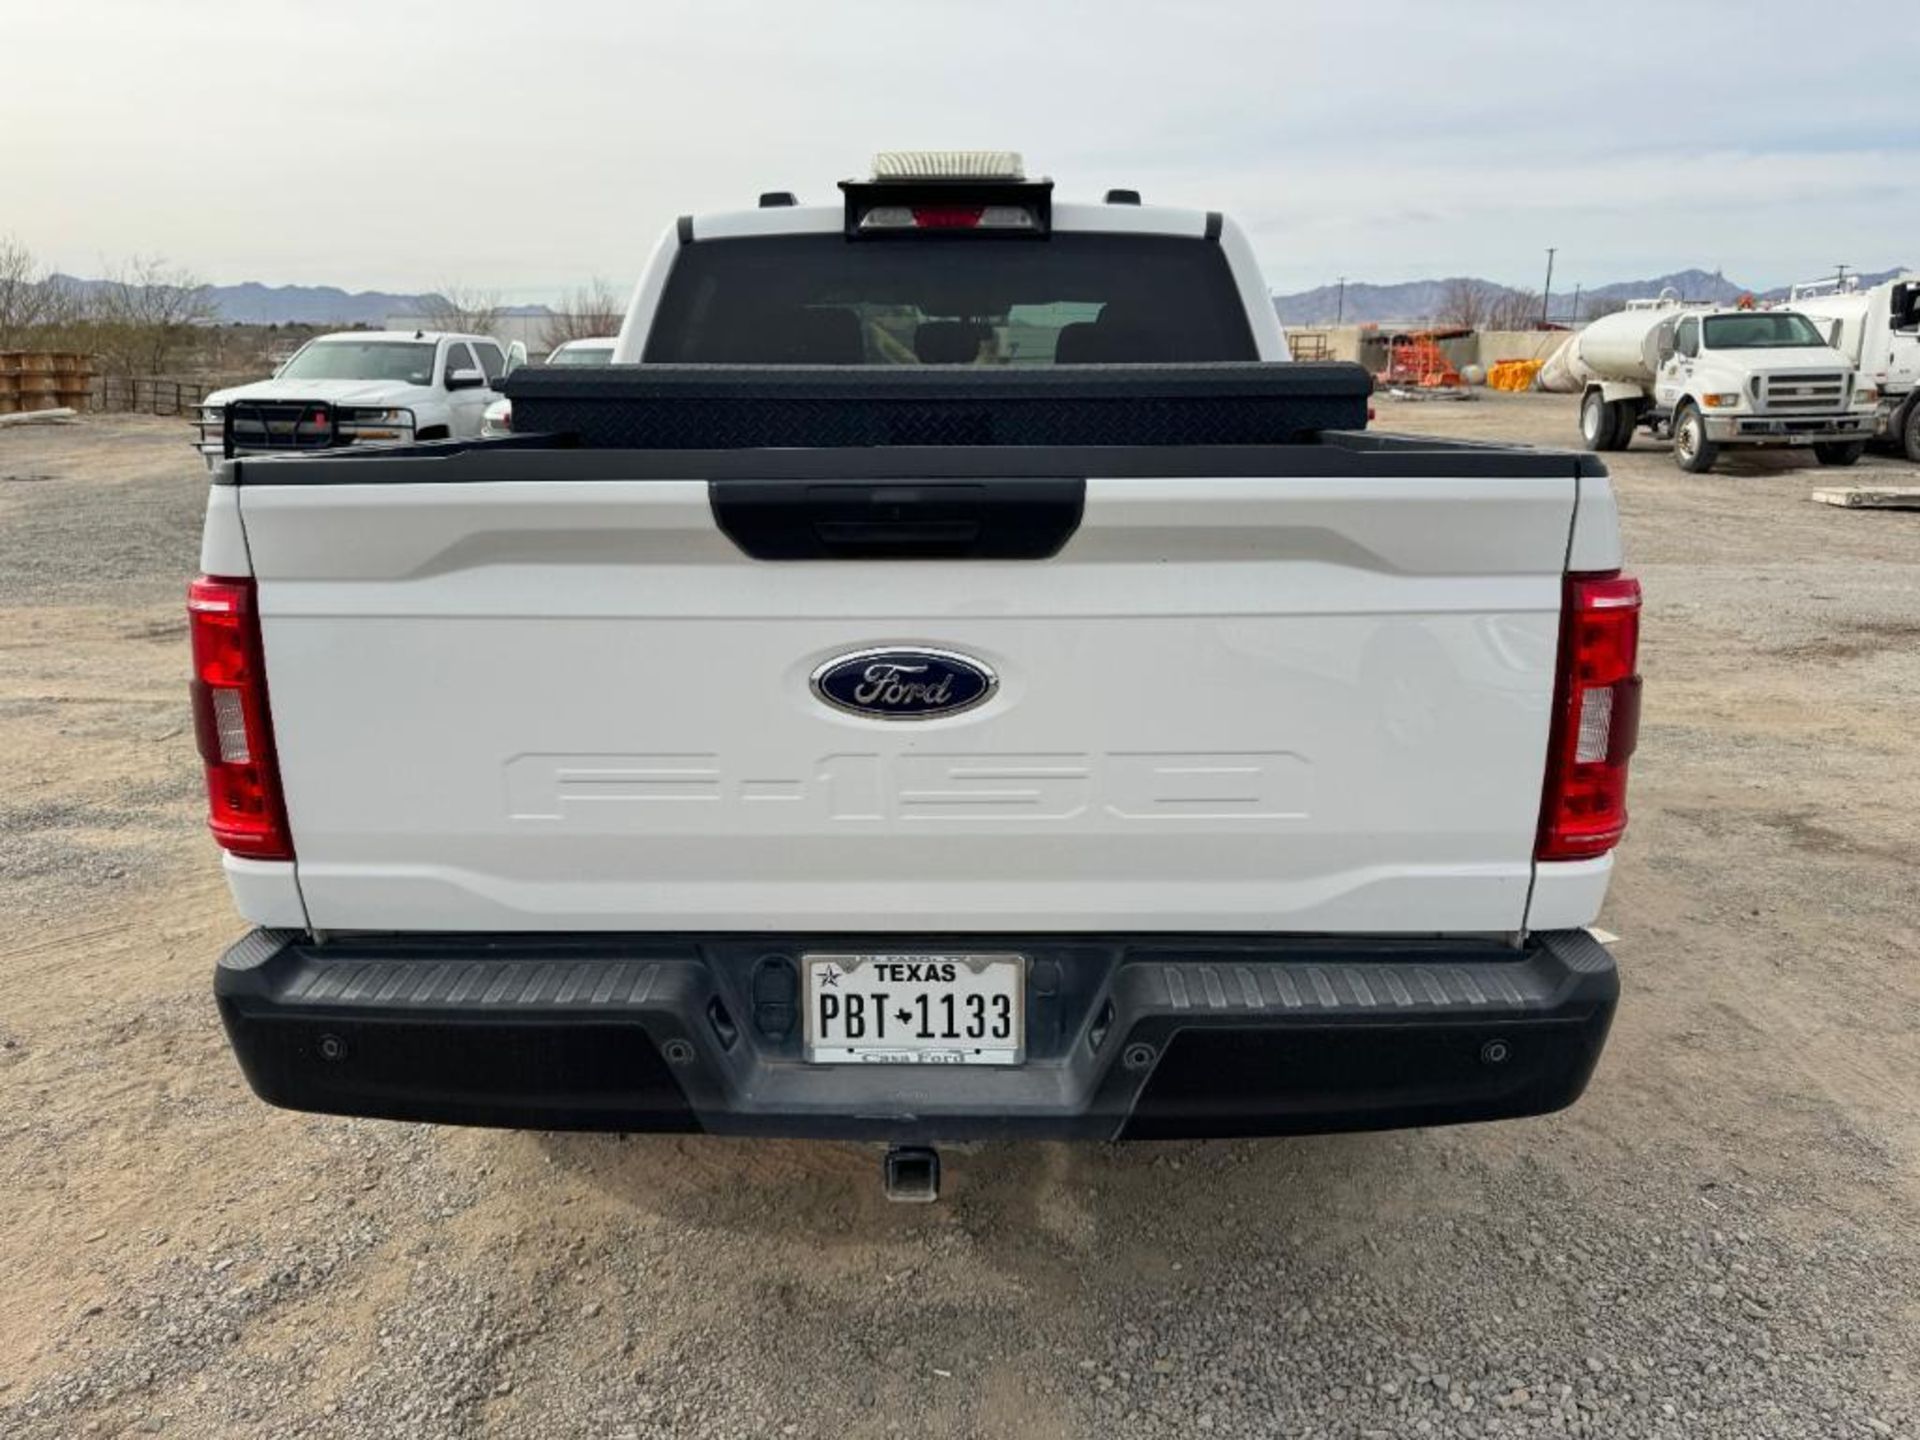 2021 Ford F150 XL Crew Cab 4X4 Truck - Image 3 of 19